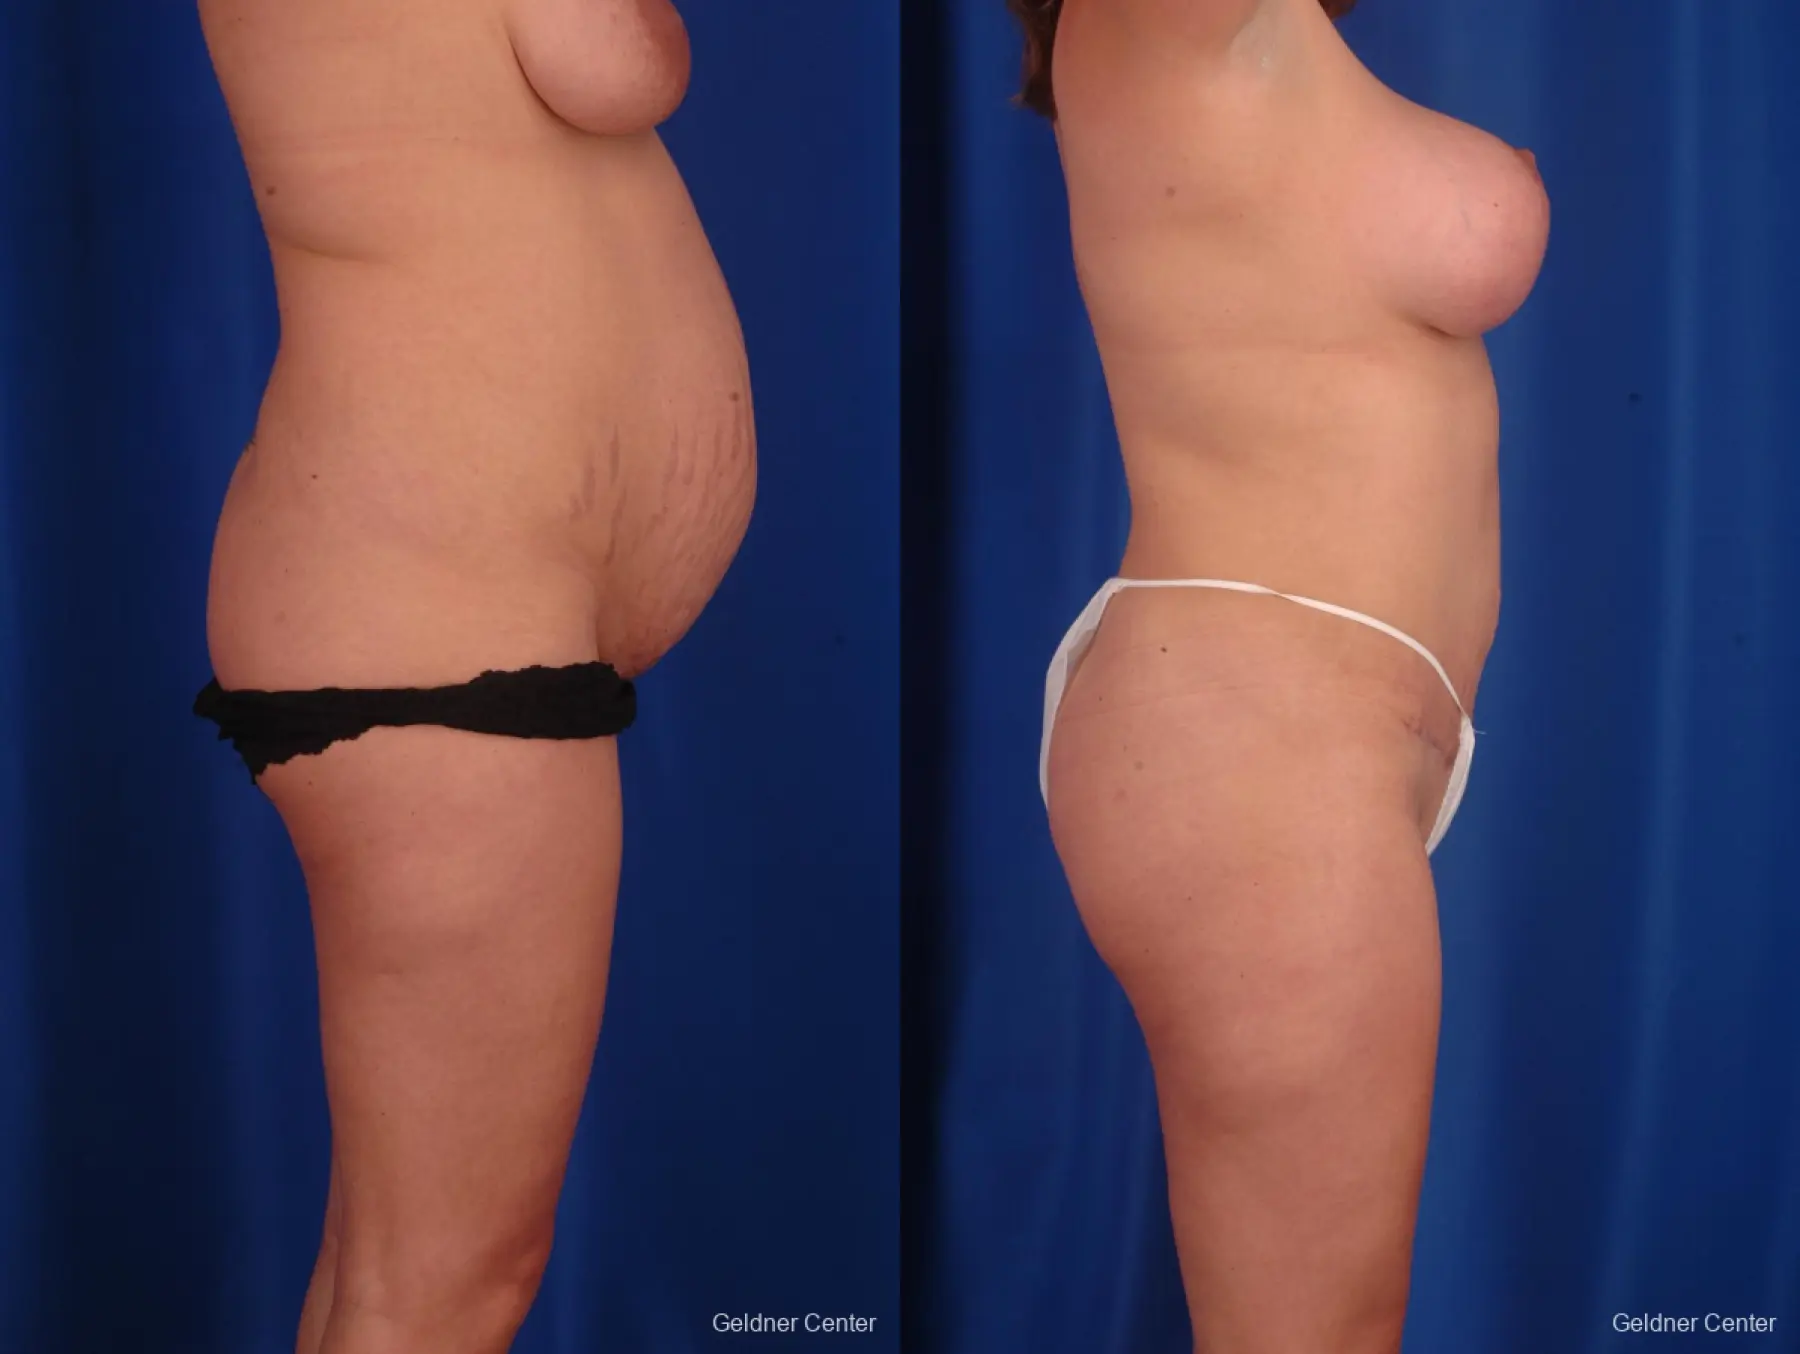 Lipoabdominoplasty: Patient 1 - Before and After 2